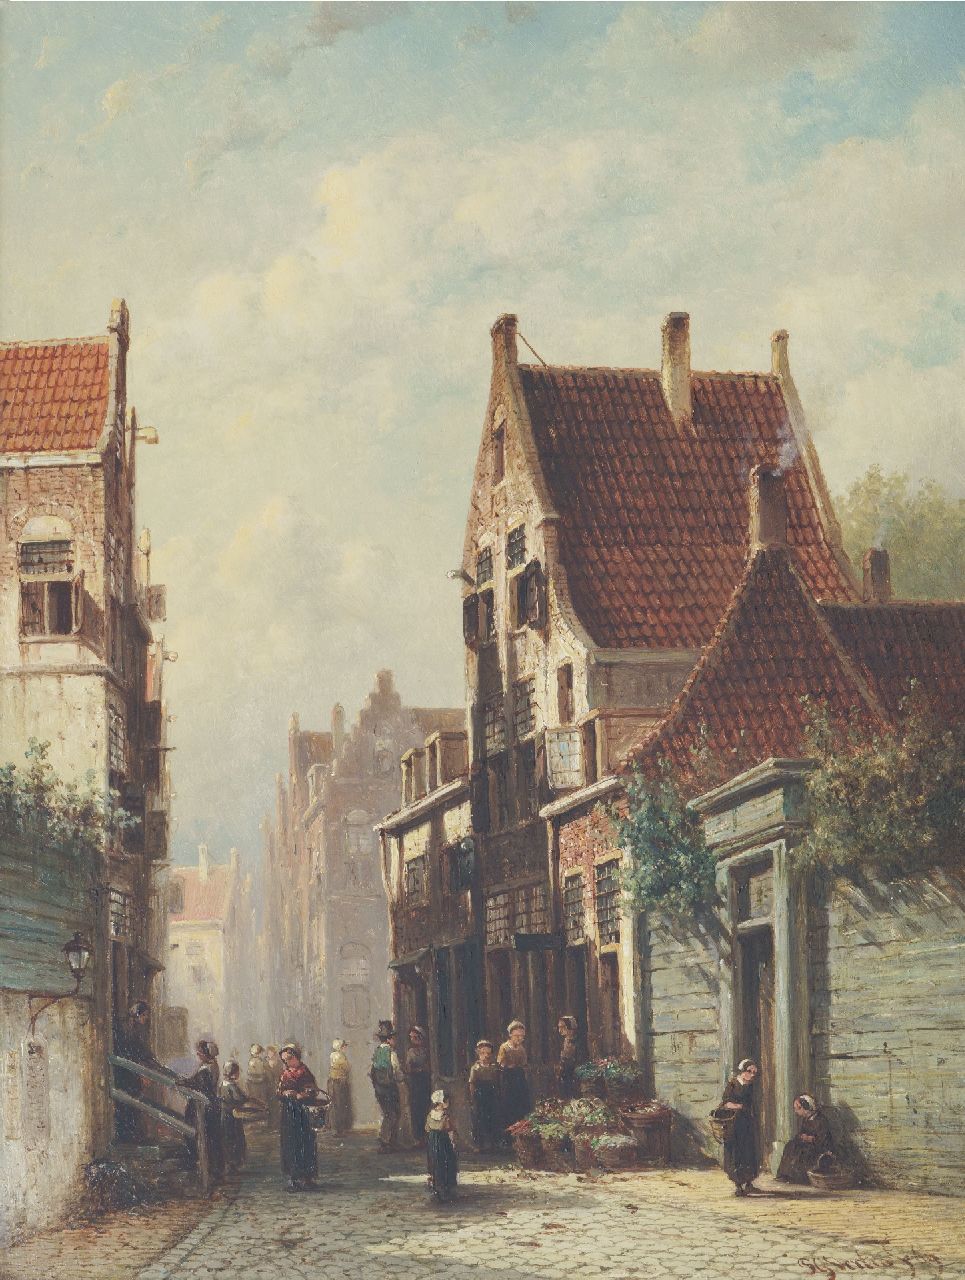 Vertin P.G.  | Petrus Gerardus Vertin | Paintings offered for sale | A sunny street with vegetable shed, oil on panel 41.1 x 31.6 cm, signed l.r. and dated '69